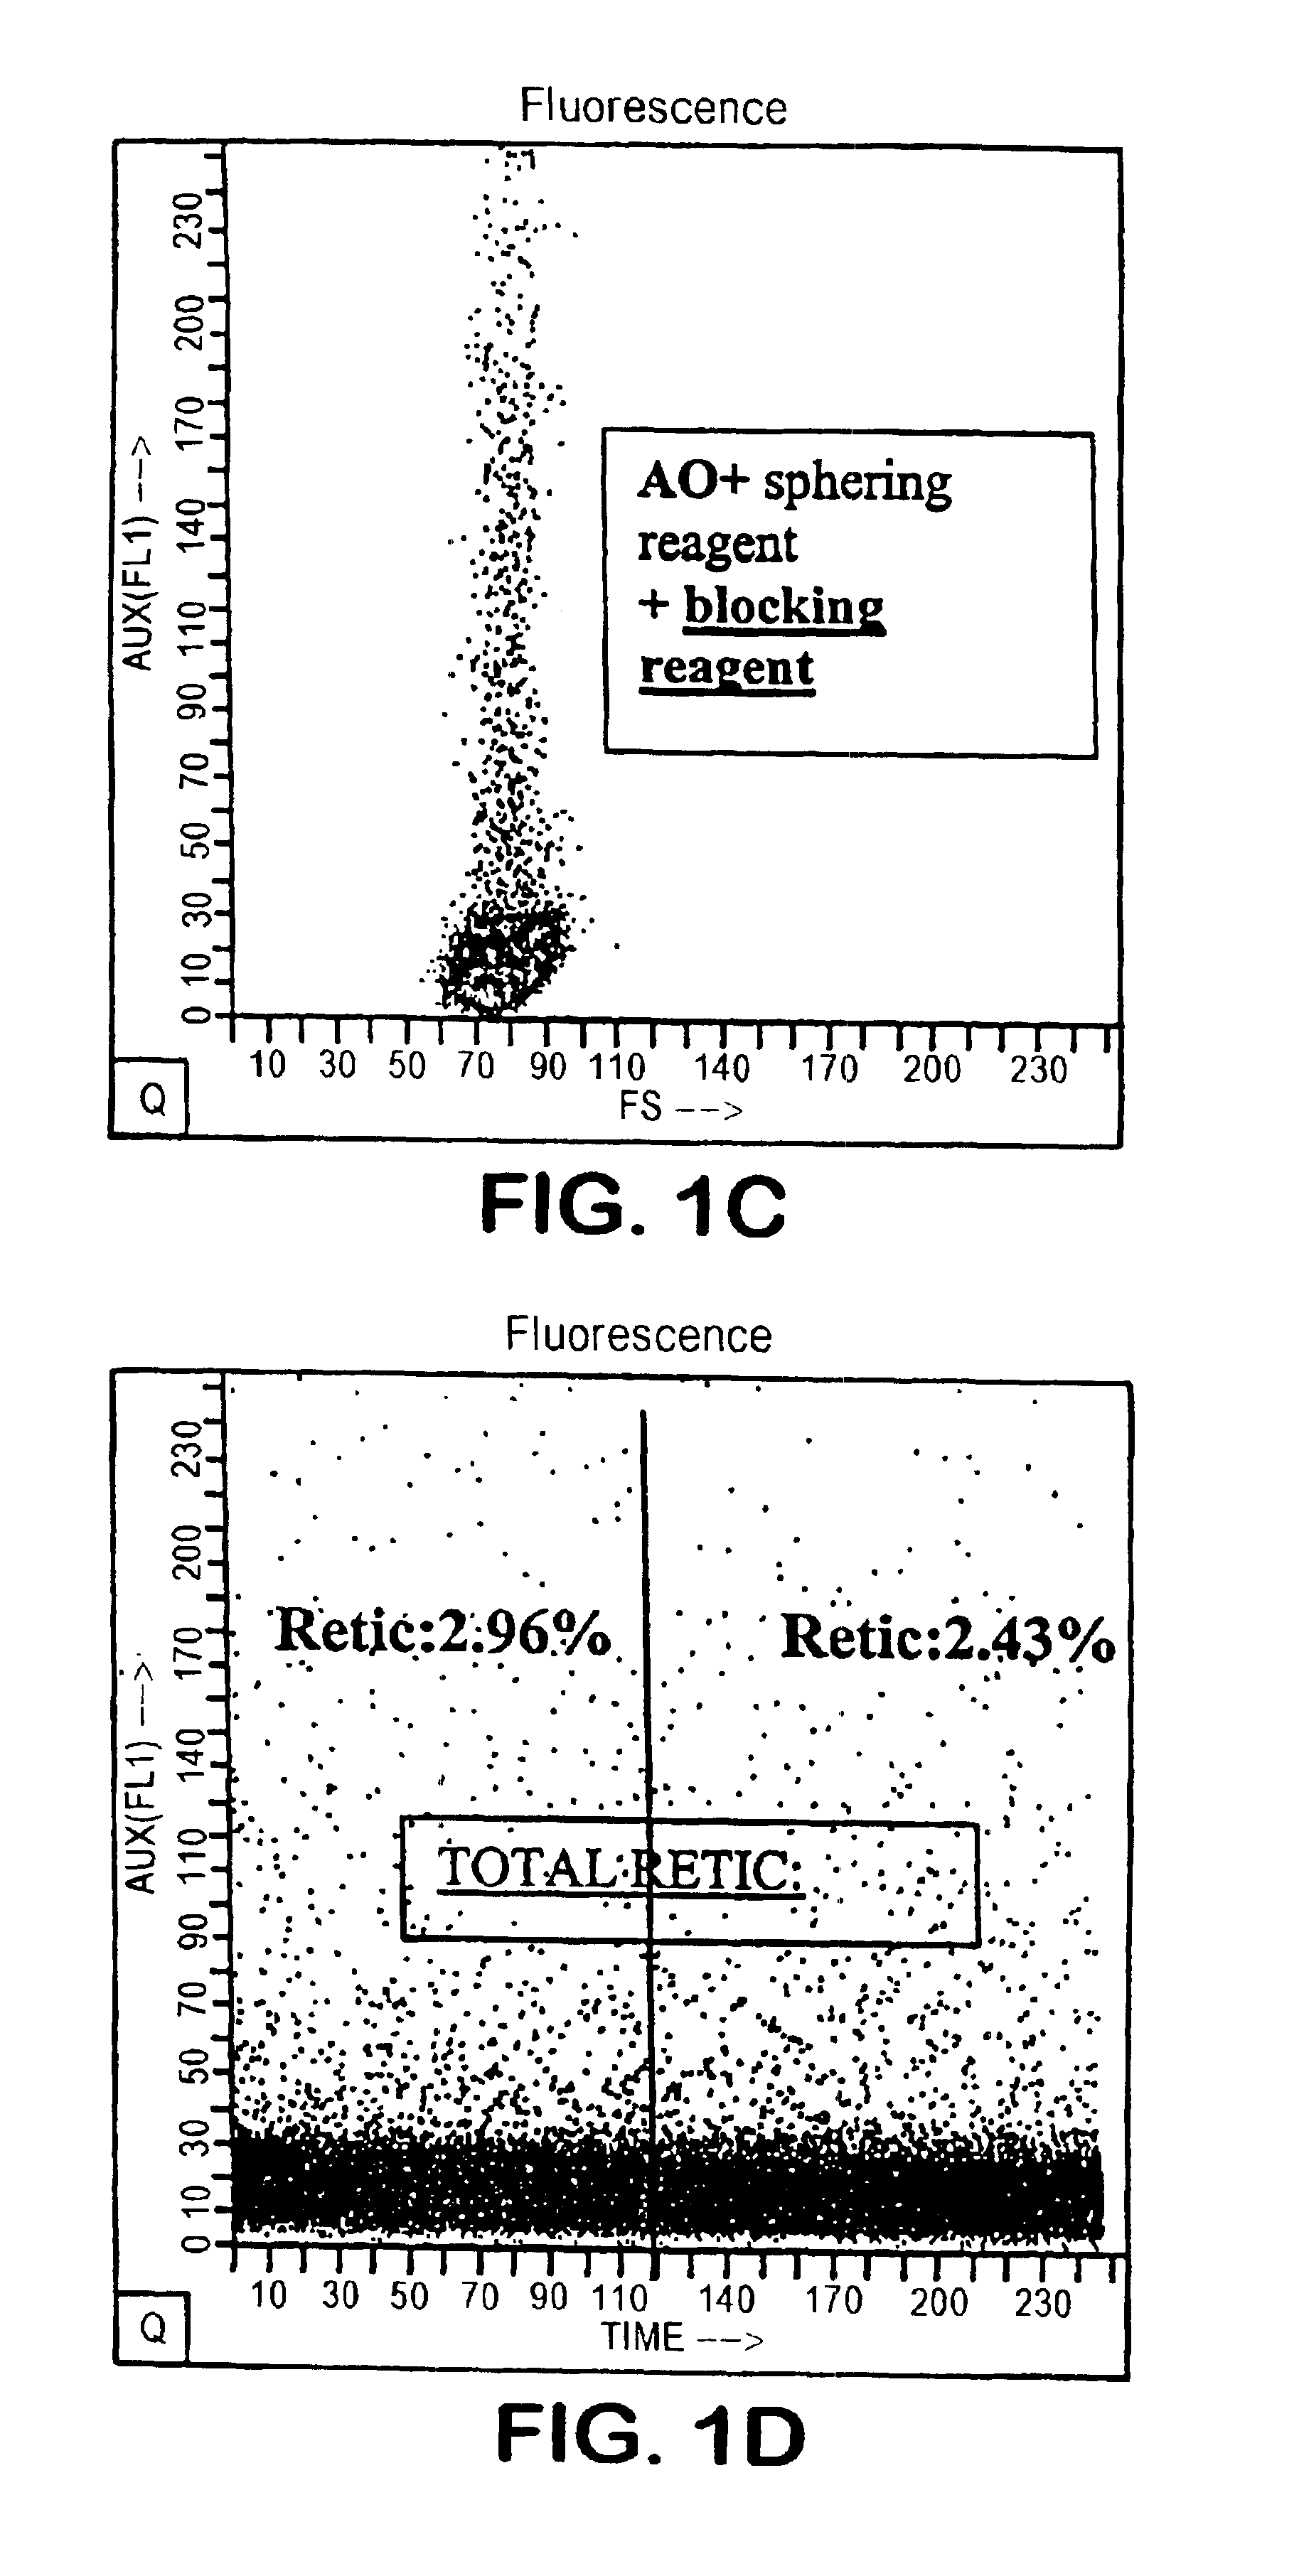 Dye compositions which provide enhanced differential fluorescence and light scatter characteristics